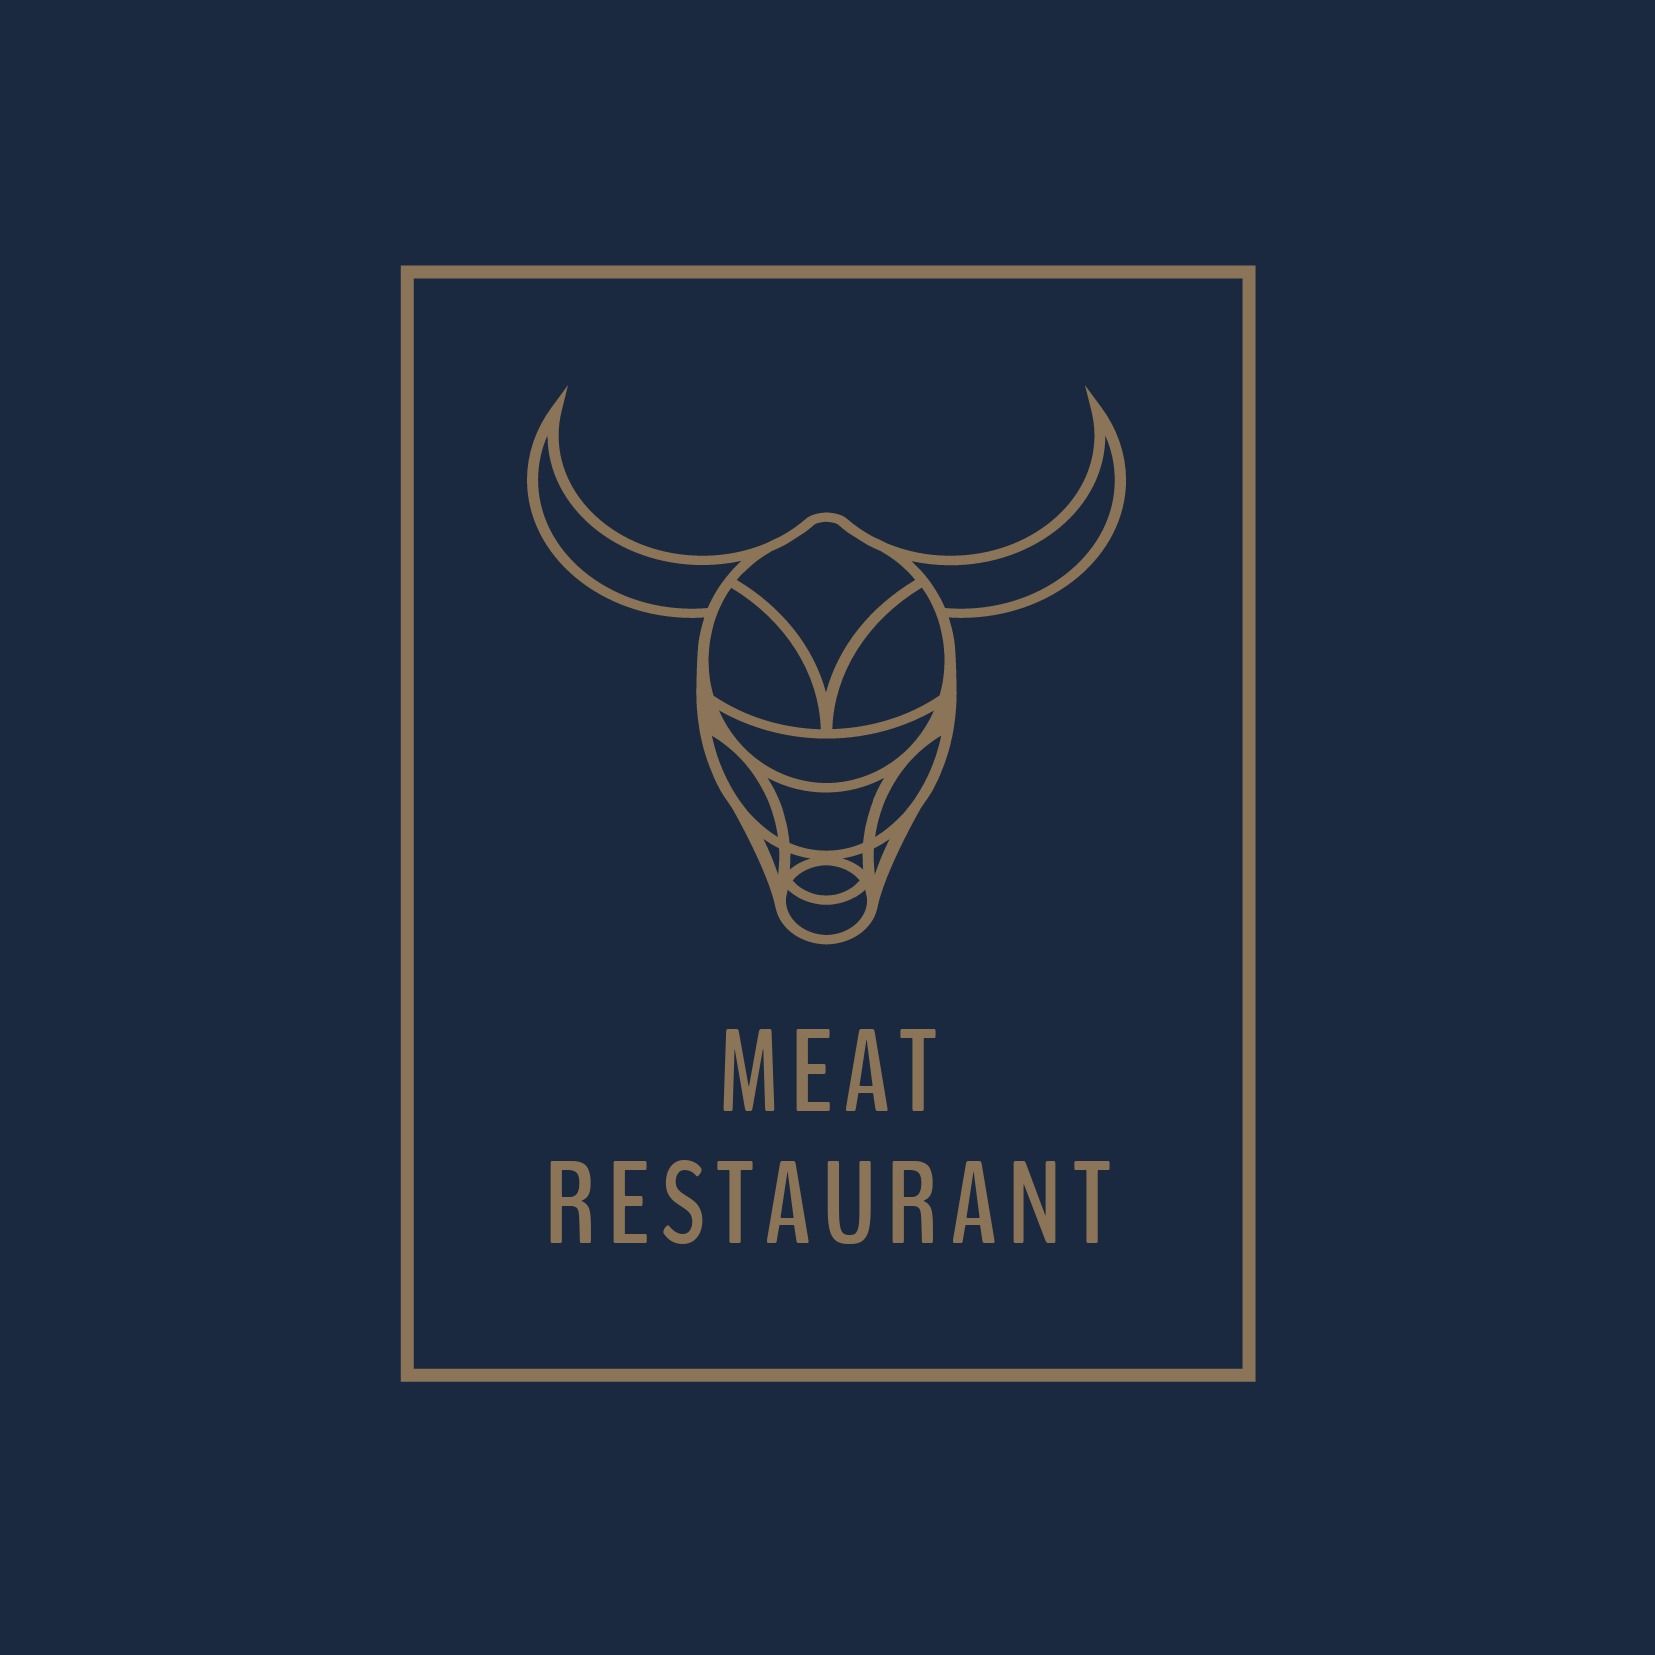 Logo for a meat restaurant with a bull's head - BenchNine is a narrow but strong and impactful font - Image